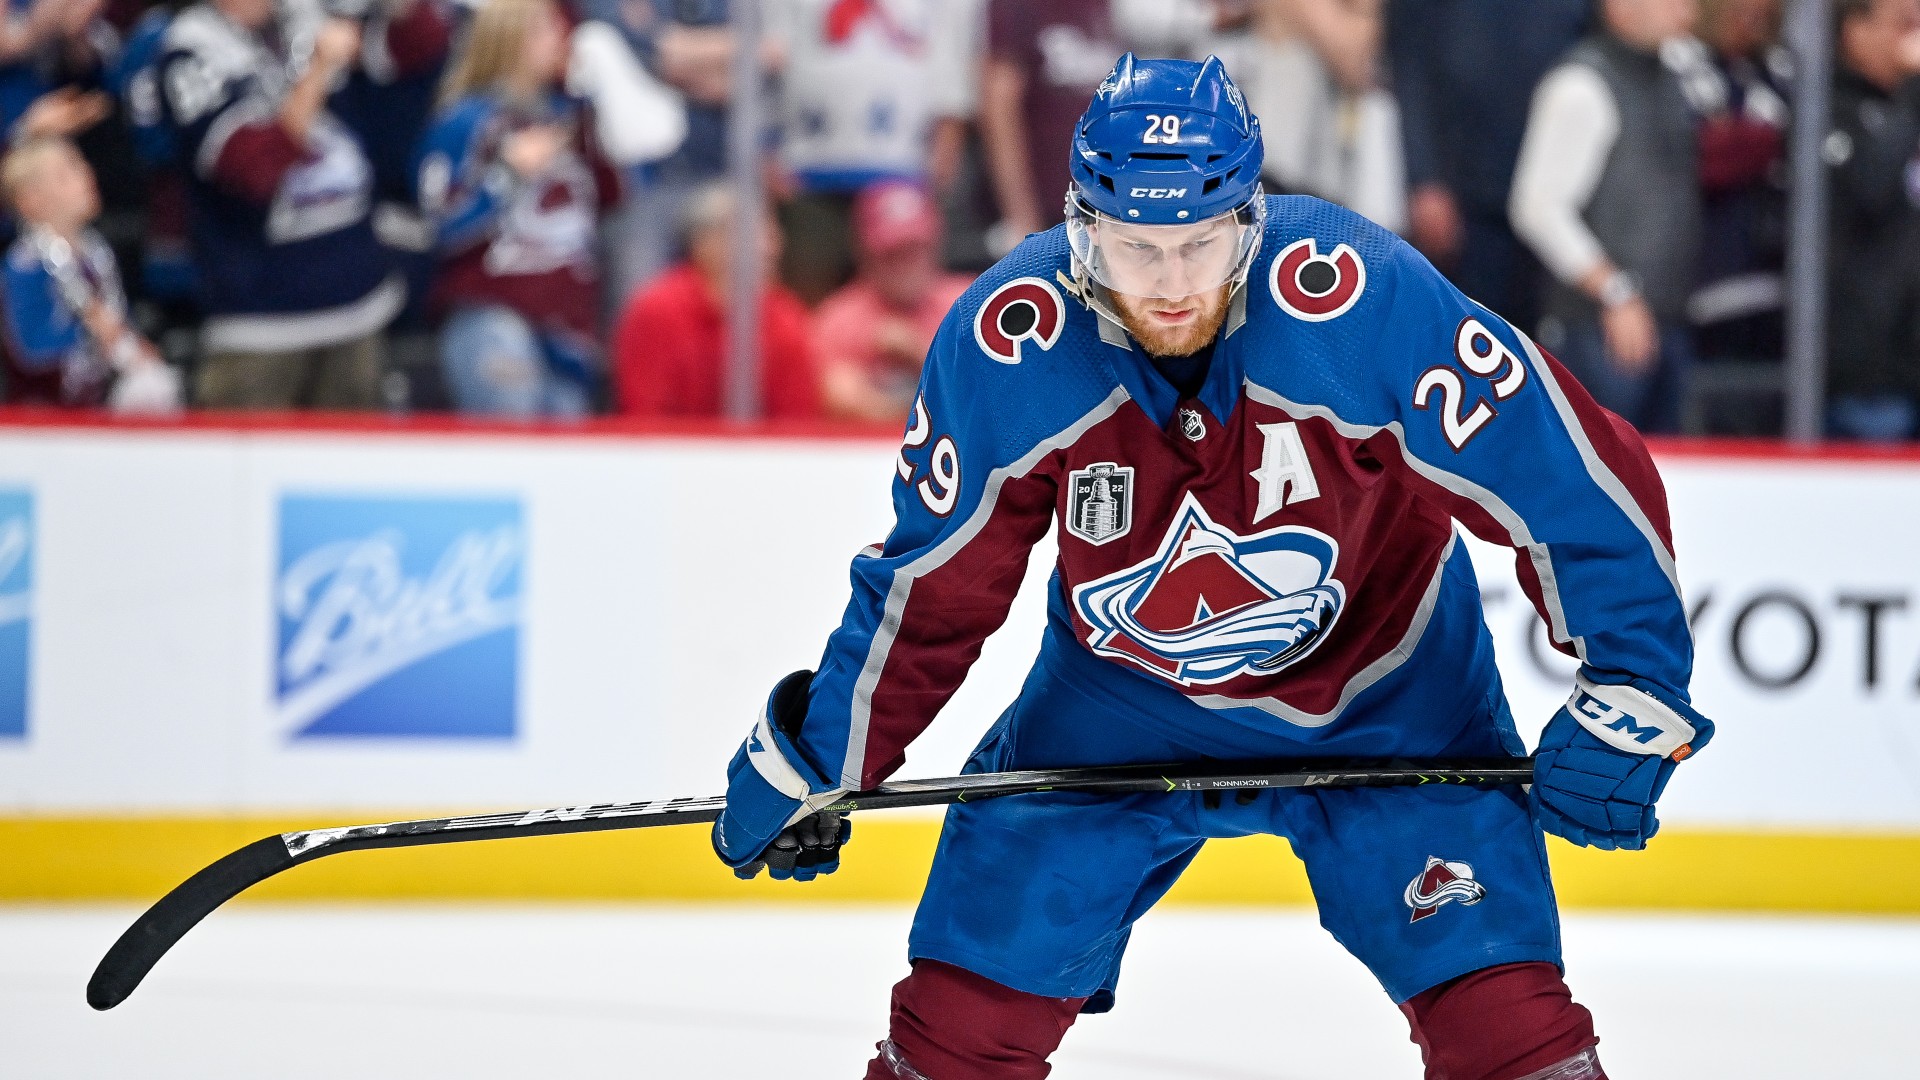 Avalanche vs. Sabres NHL Odds, Pick: How Many Goals Will be Scored? article feature image